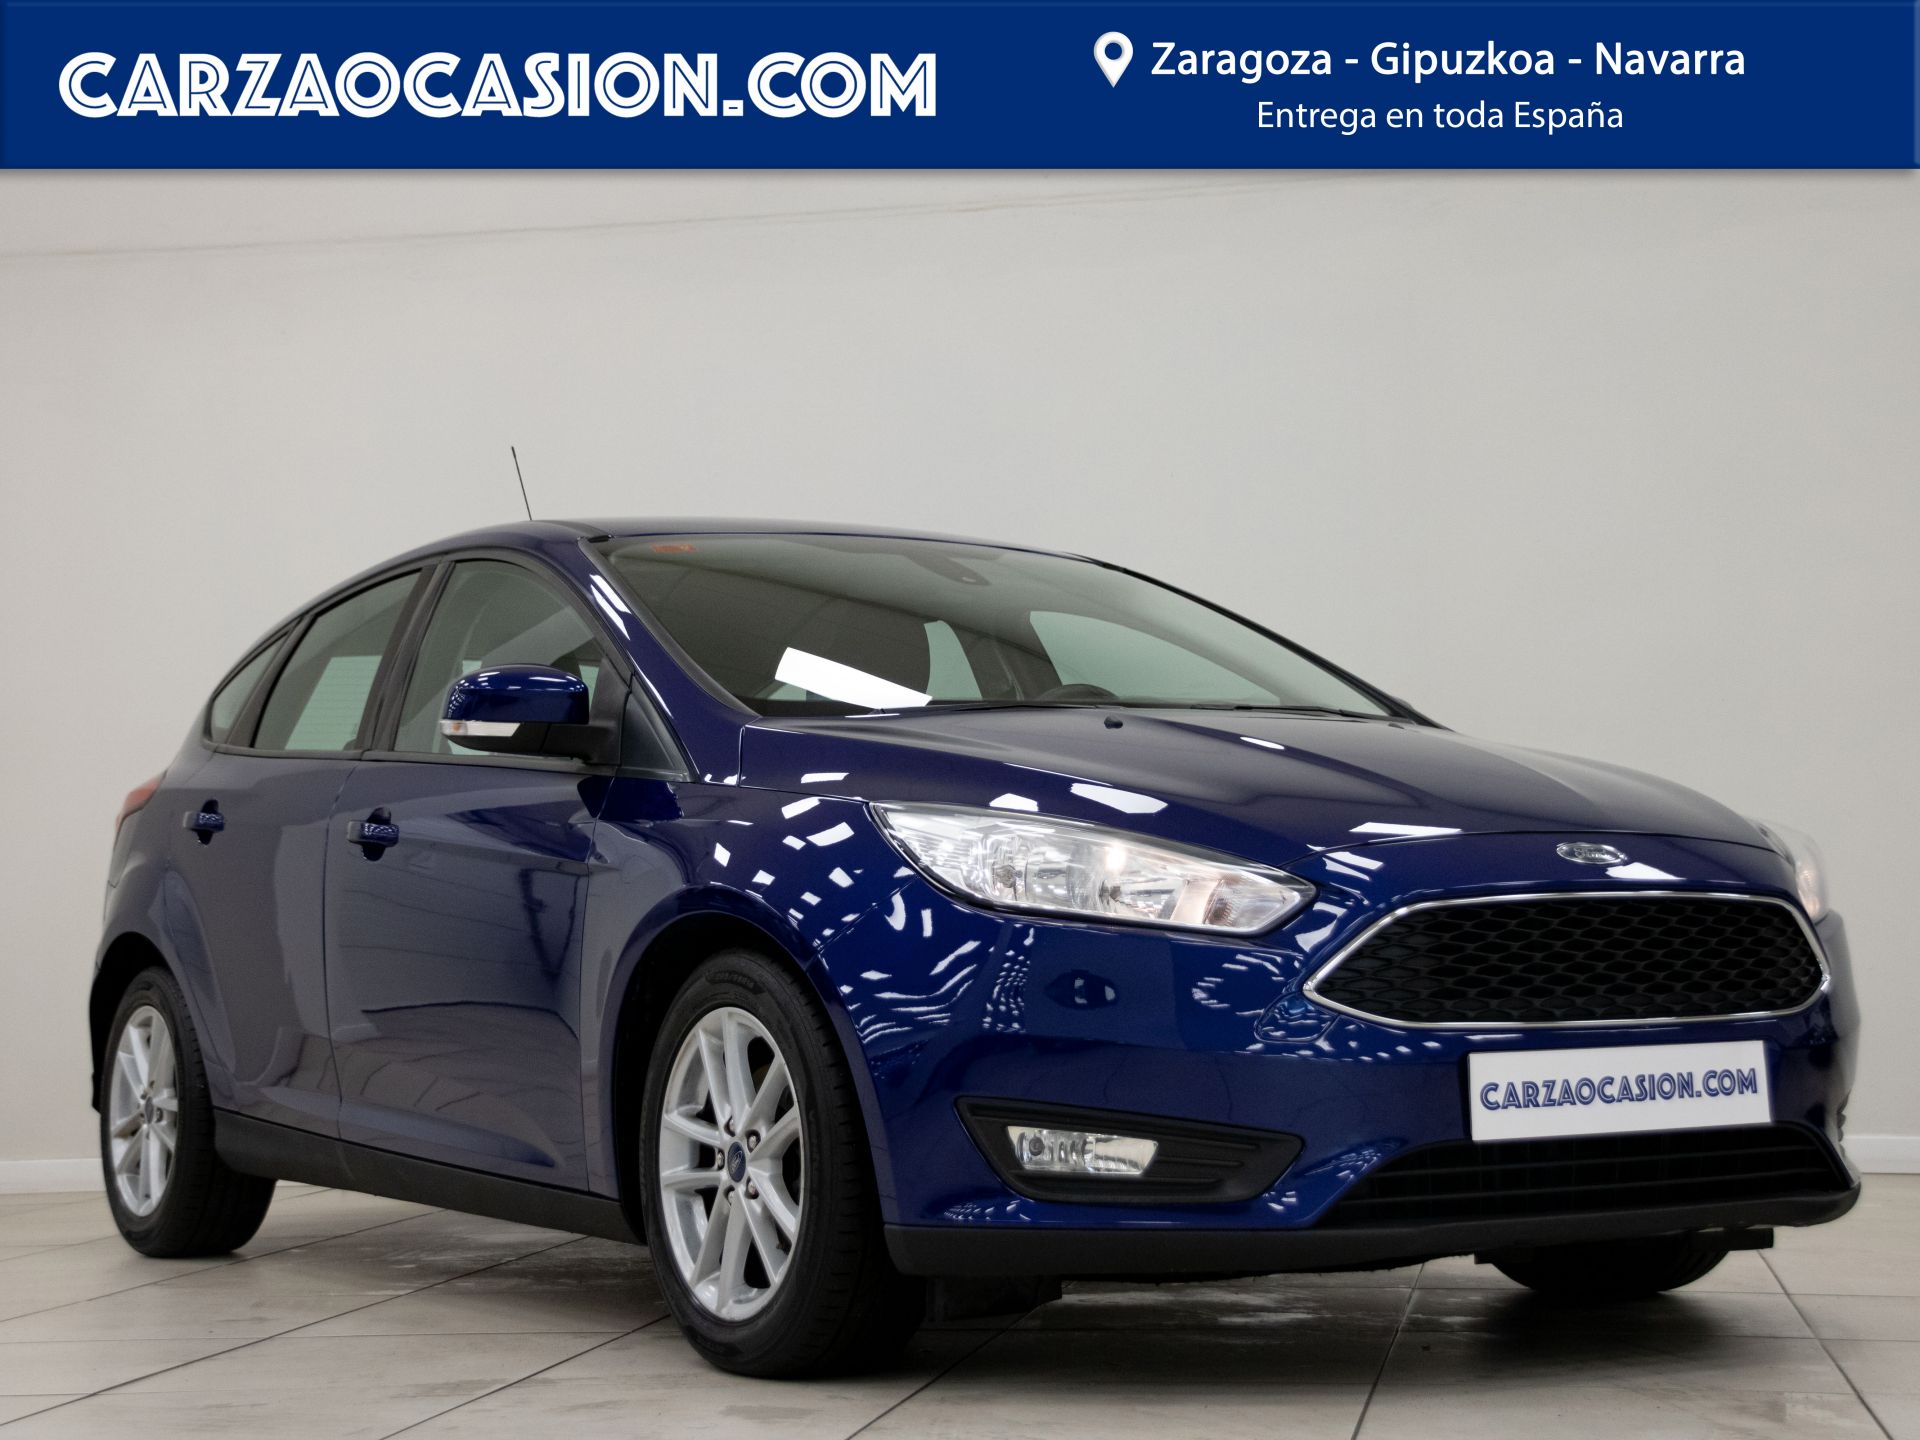 Ford Focus 1.0 Ecoboost 74kW Trend